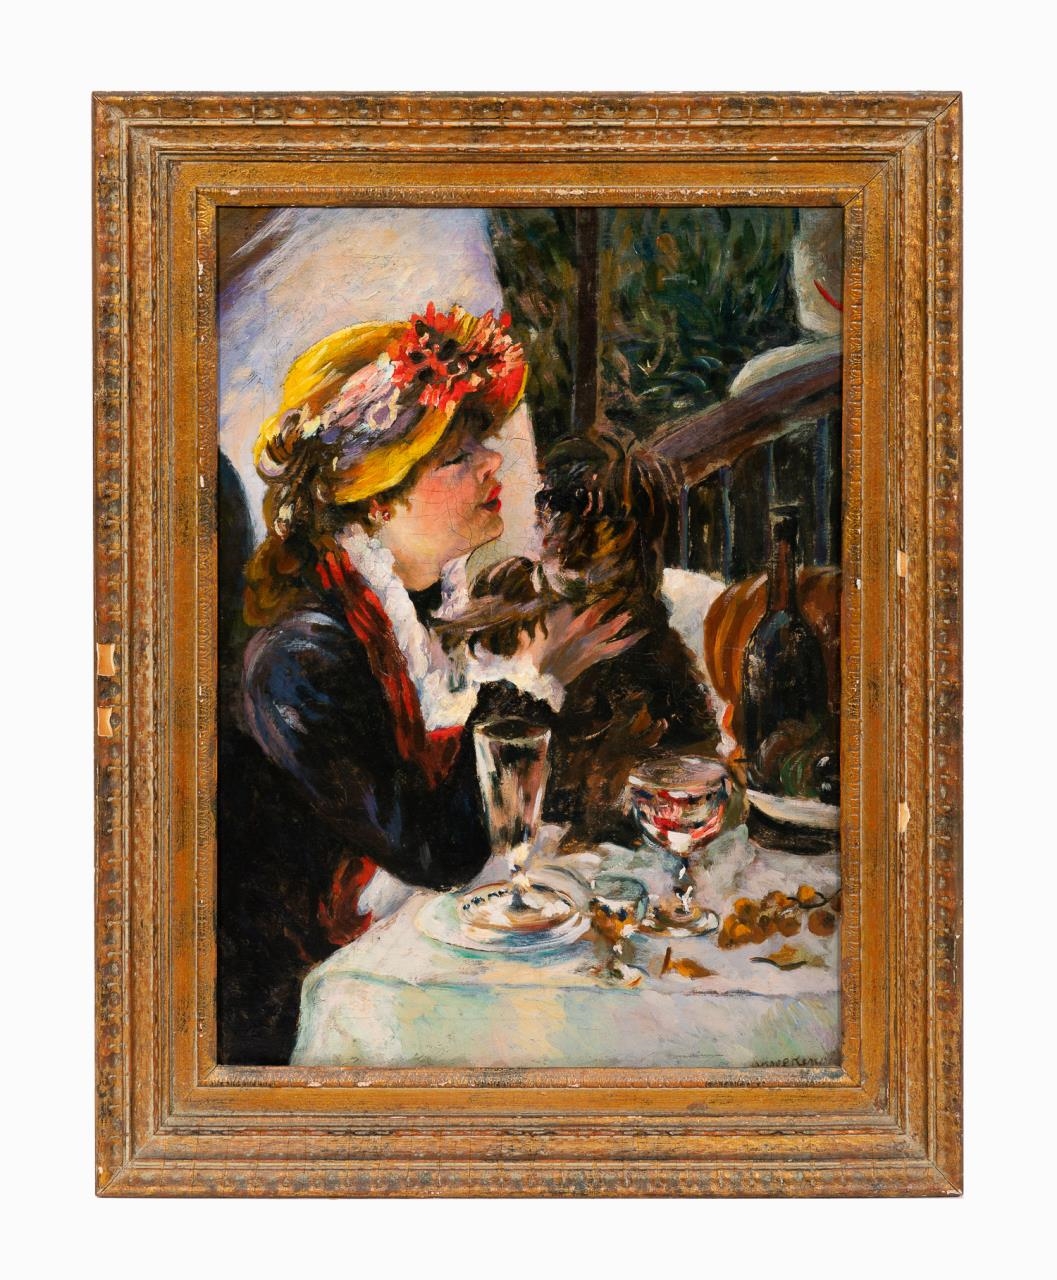 AFTER RENOIR, "LUNCHEON OF THE BOATING PARTY", OIL by Pierre-Auguste Renoir